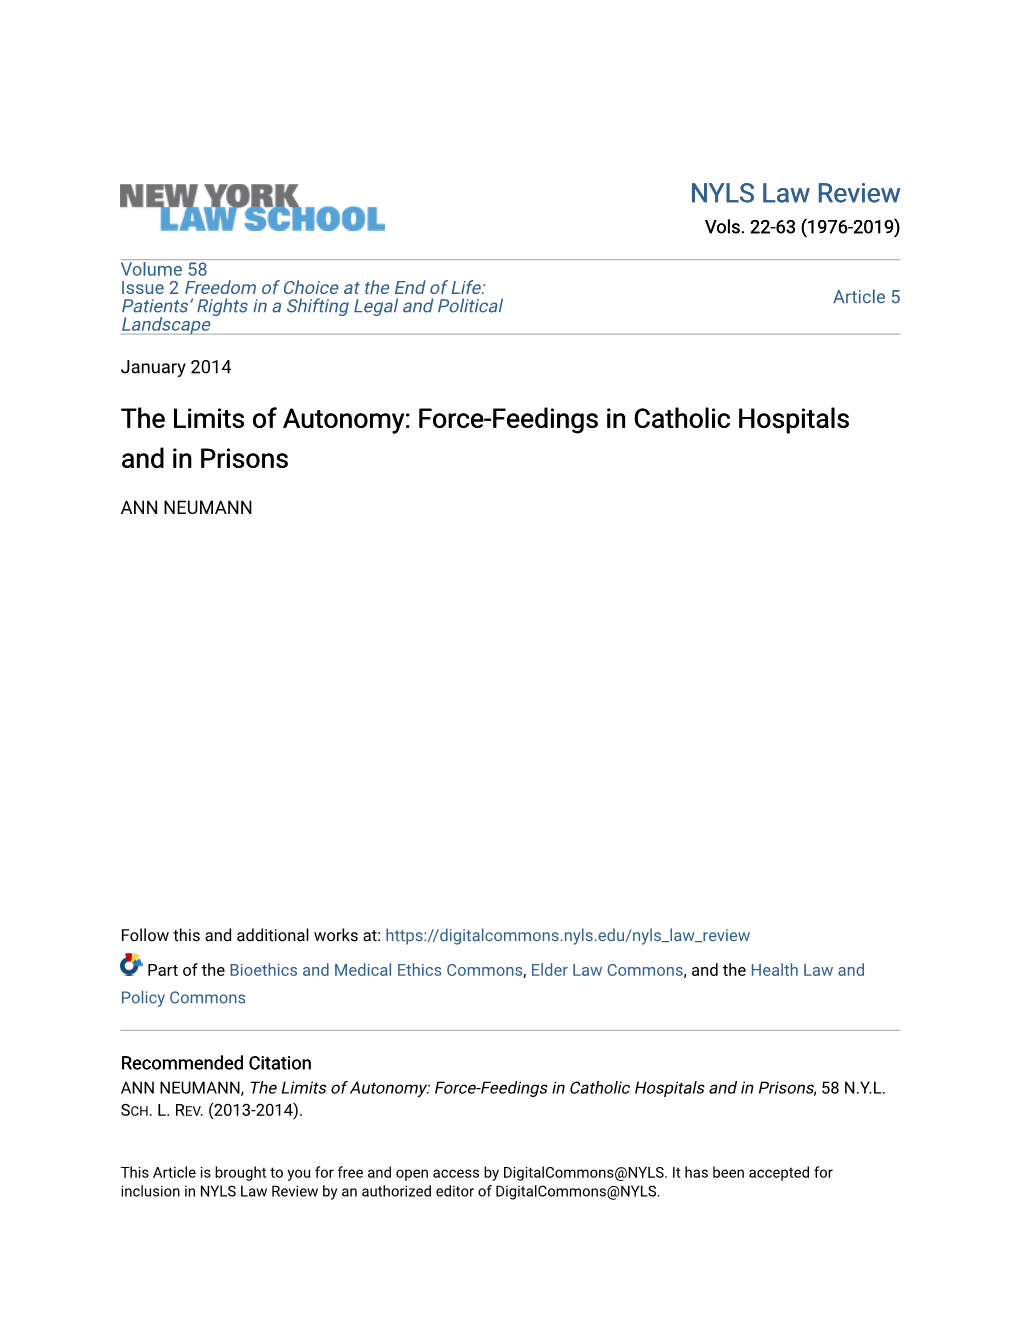 Force-Feedings in Catholic Hospitals and in Prisons